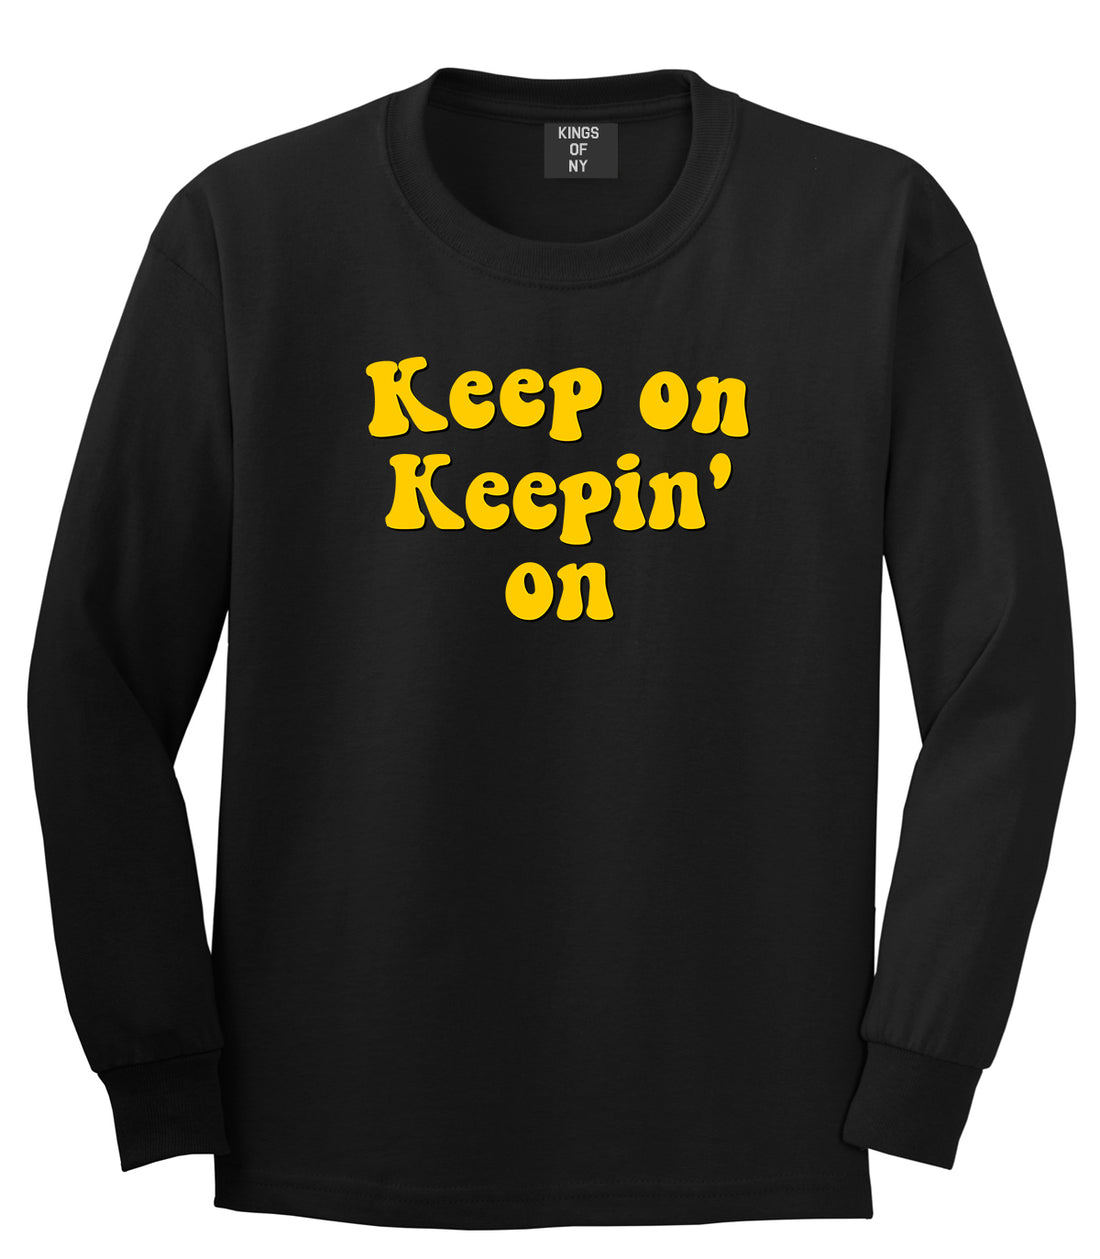 Keep On Keepin On Mens Long Sleeve T-Shirt Black by Kings Of NY